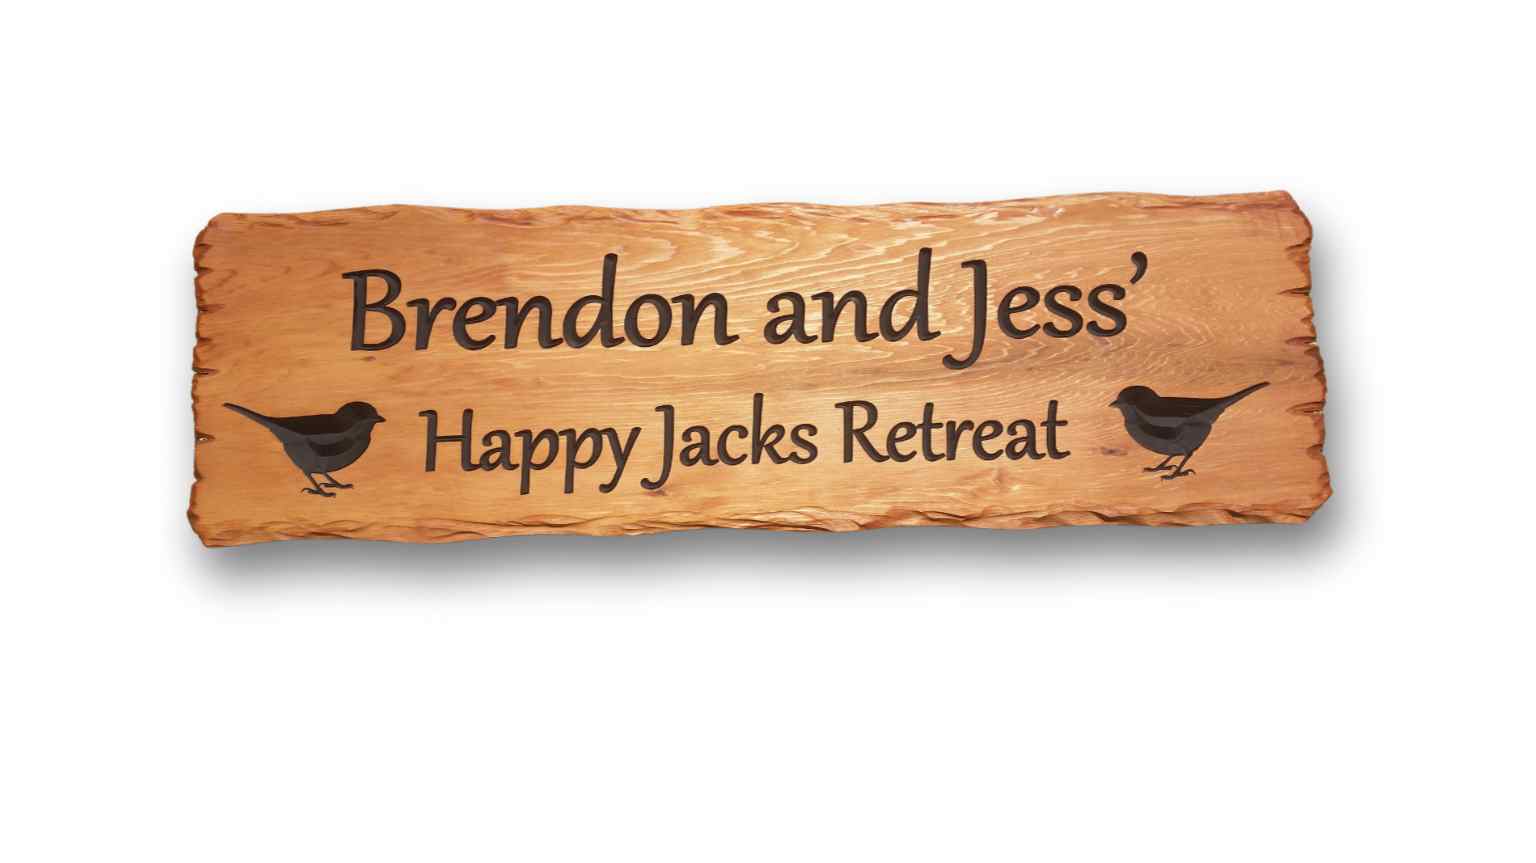 house sign outdoors Happy Jacks Retreat with bird pictures engraved Cedar sign with rustic edges